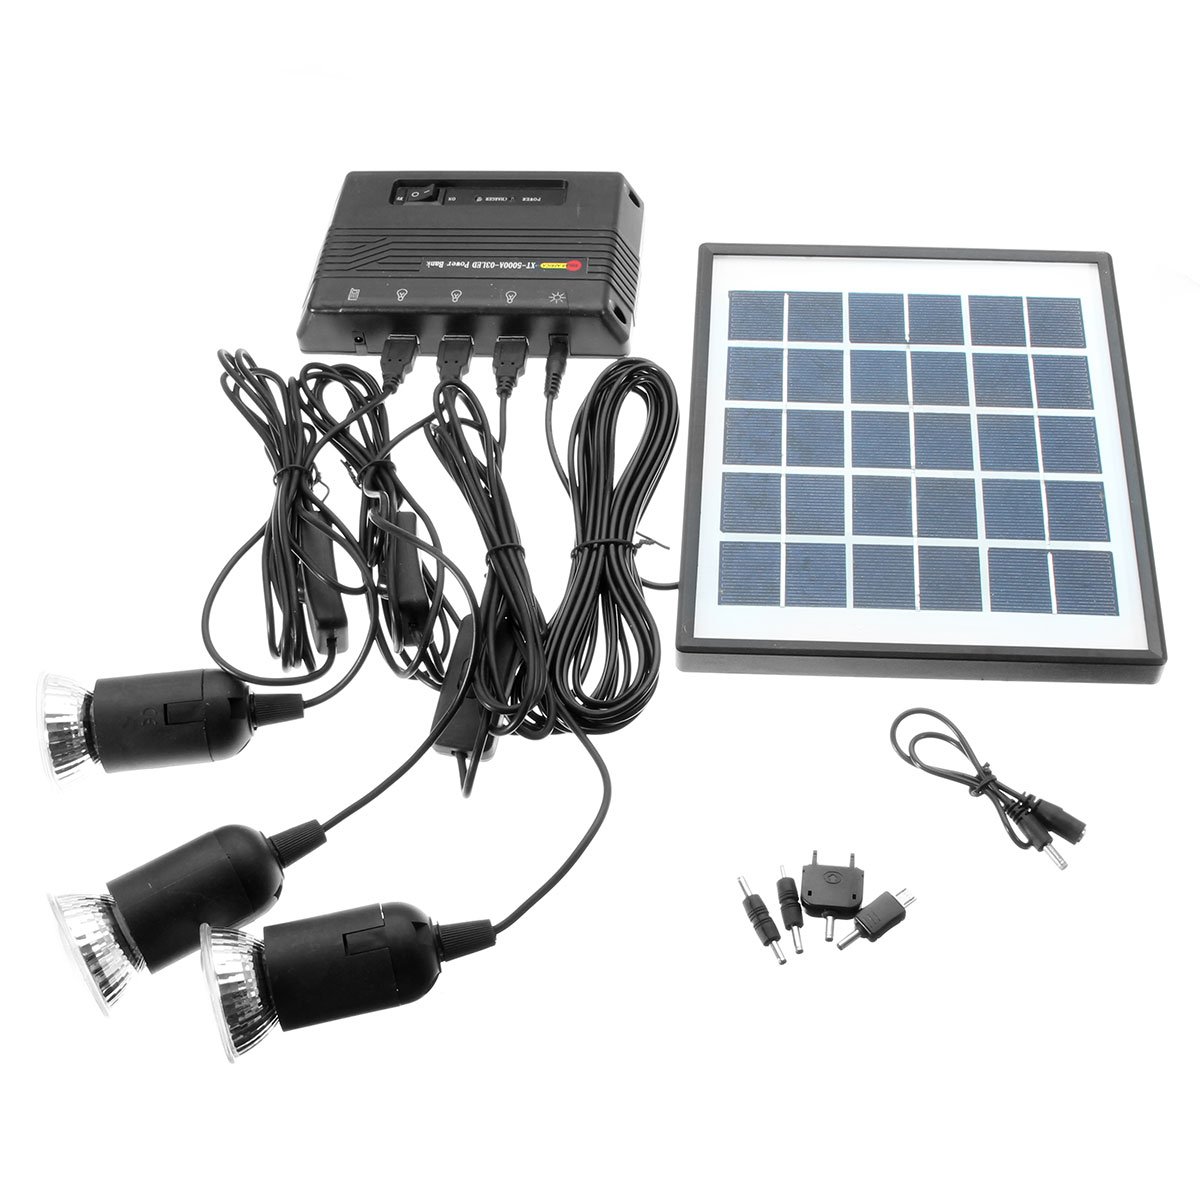 6V 4W DIY Outdoor Solar Panel With Power Bank + 3*3.7V 1W LED Lamp For USB Charging 2